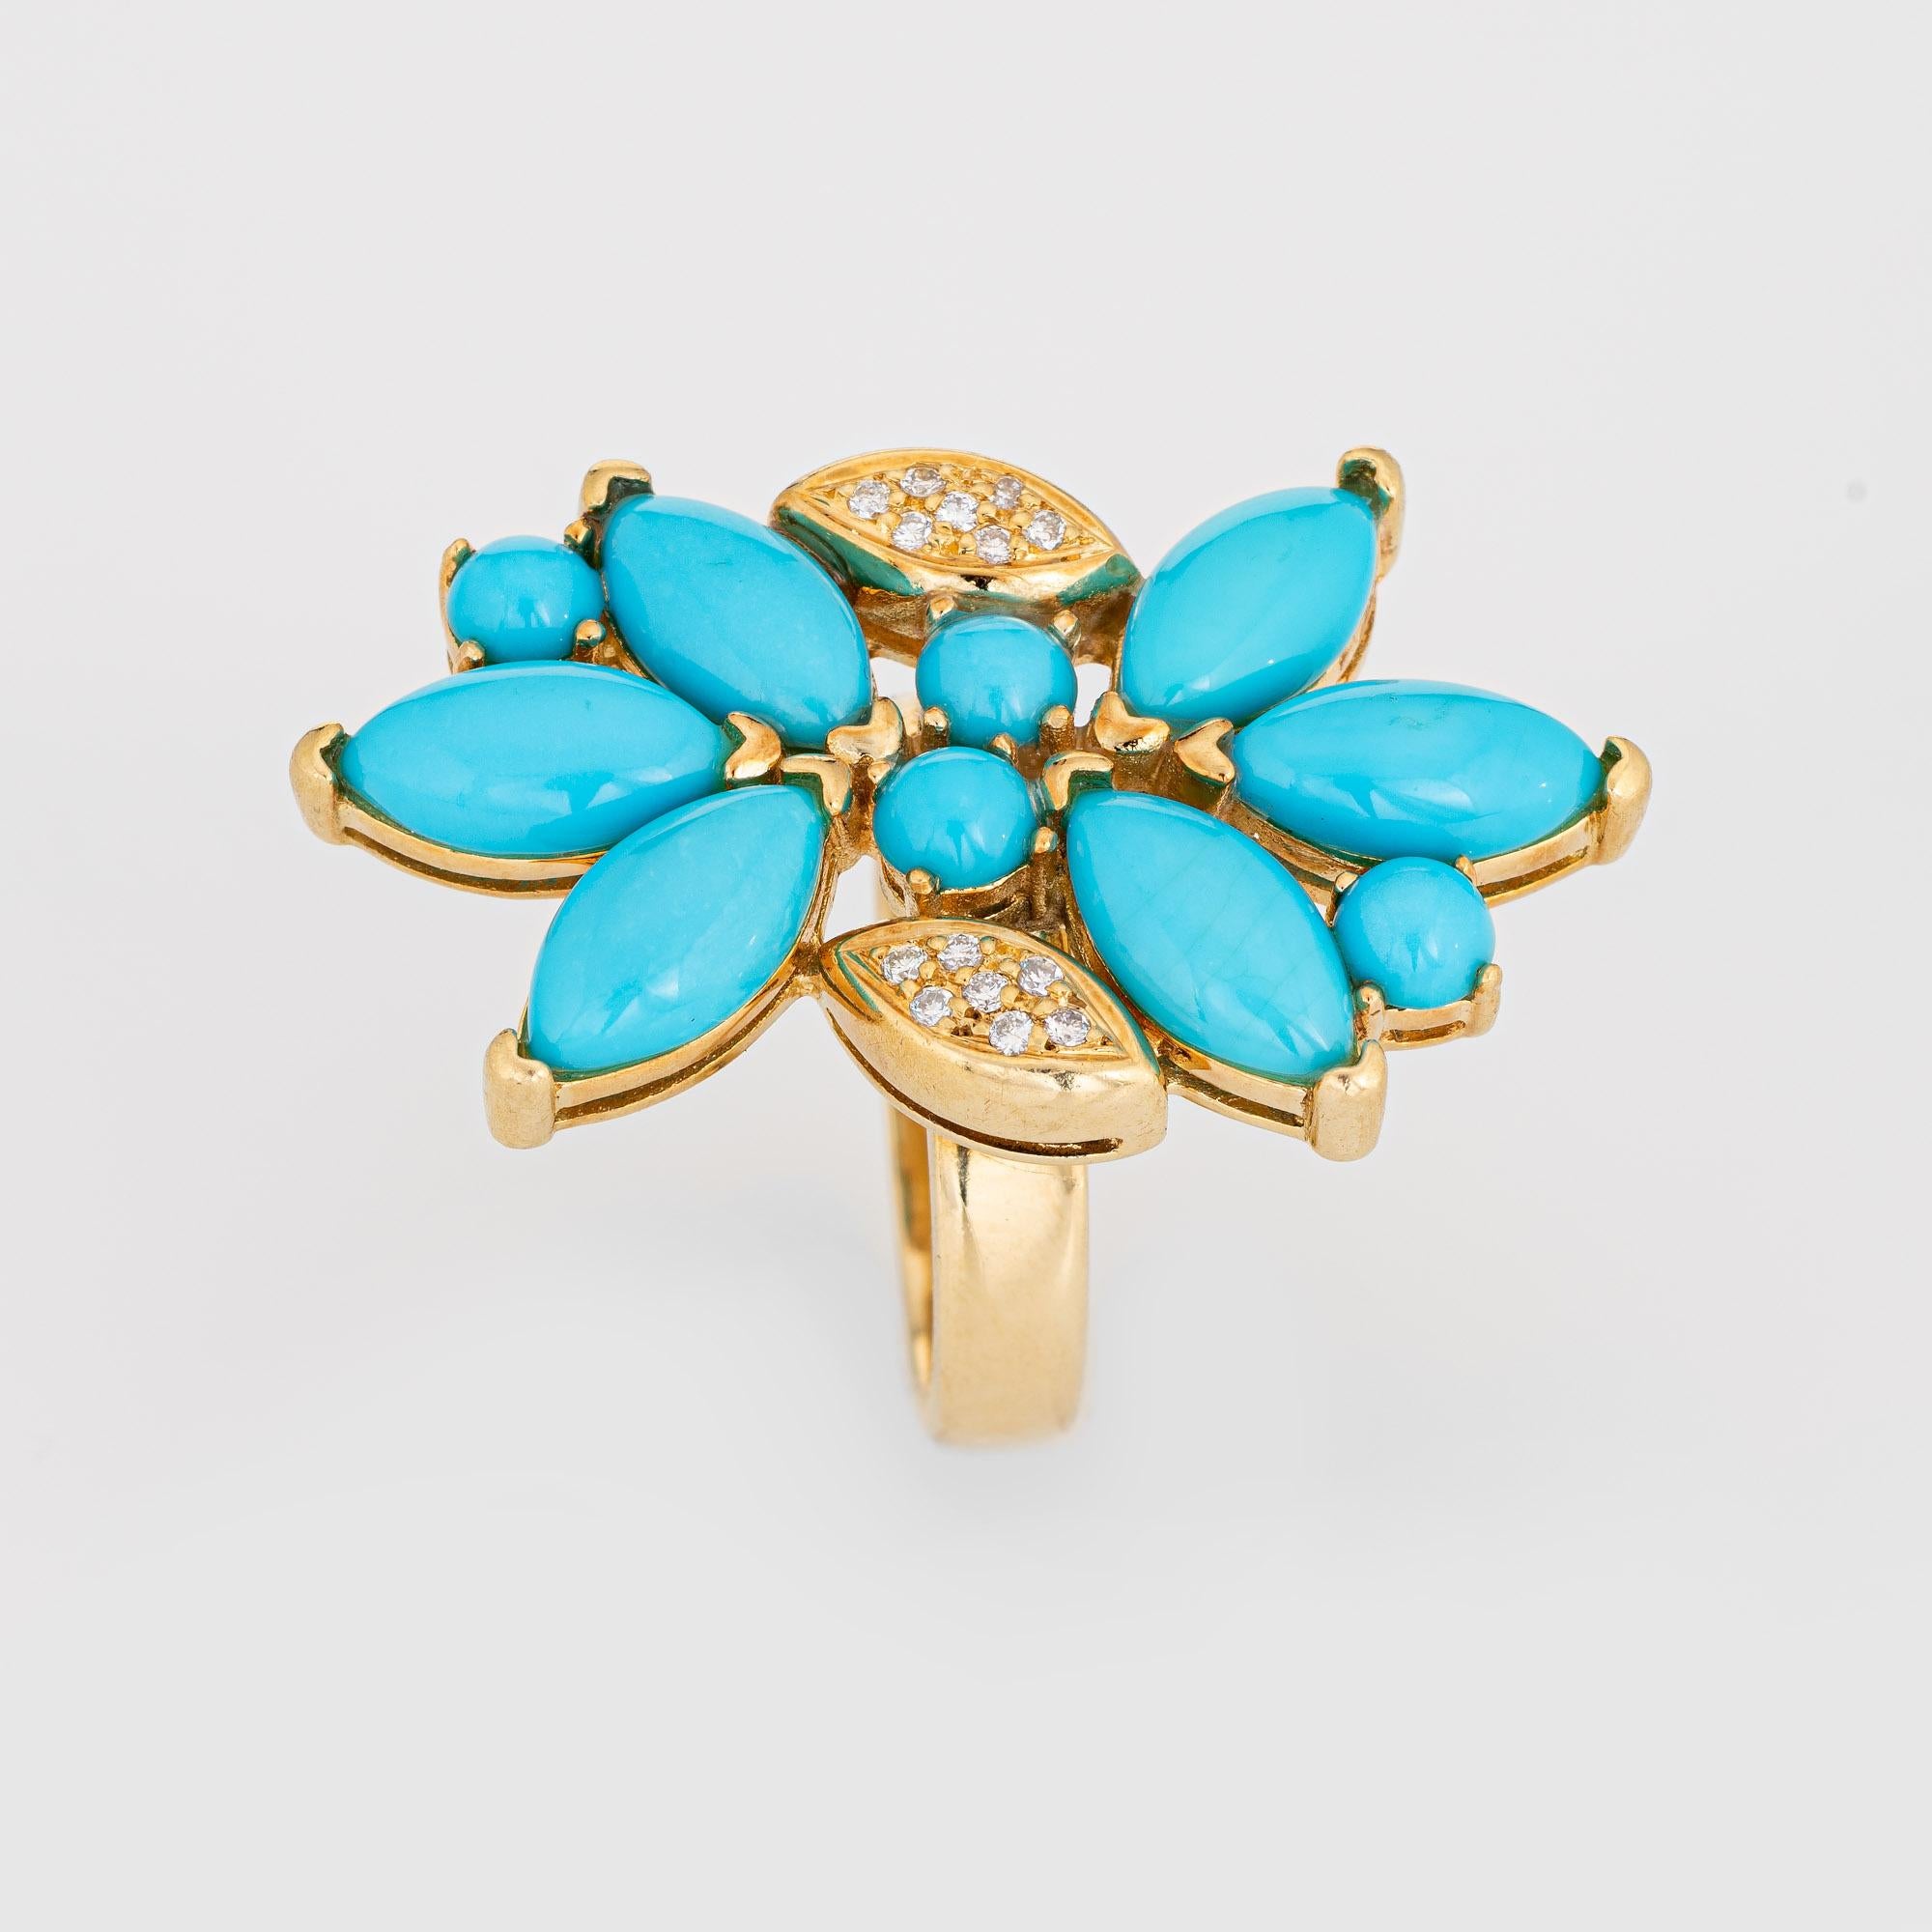 Stylish vintage turquoise & diamond cluster ring (circa 1980s to 1990s) crafted in 18 karat yellow gold. 

Turquoise cabochons measure from 9mm x 5mm to 5mm. Diamonds total an estimated 0.07 carats (estimated at H-I color and VS2-I2 clarity). The